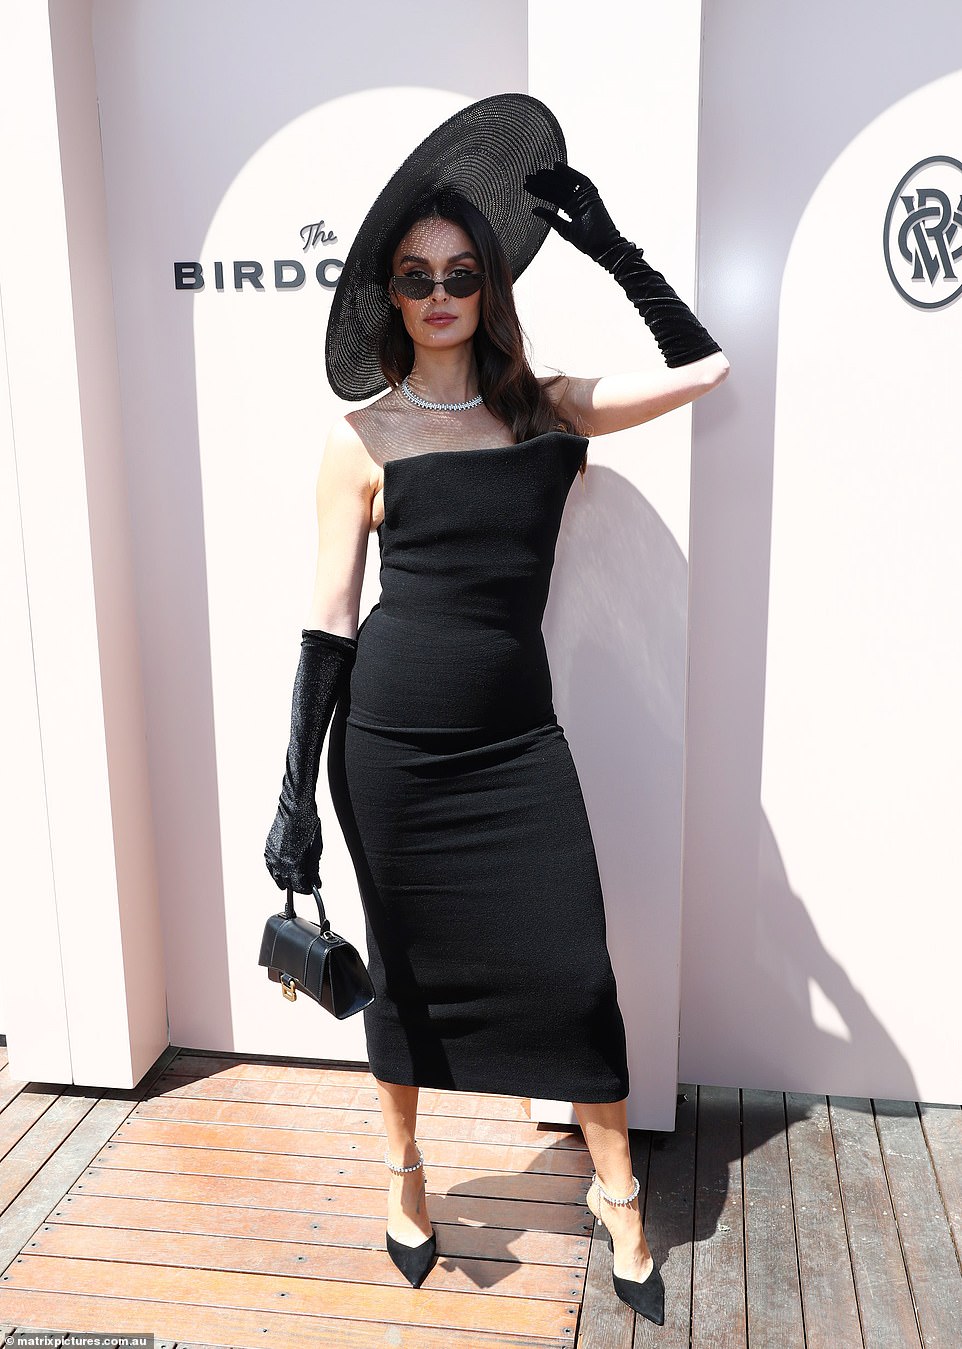 Model mum Nicole Trunfio made quite the Marilyn Munroe entrance at Penfolds Derby Day at Flemington Racecourse in Melbourne on Saturday